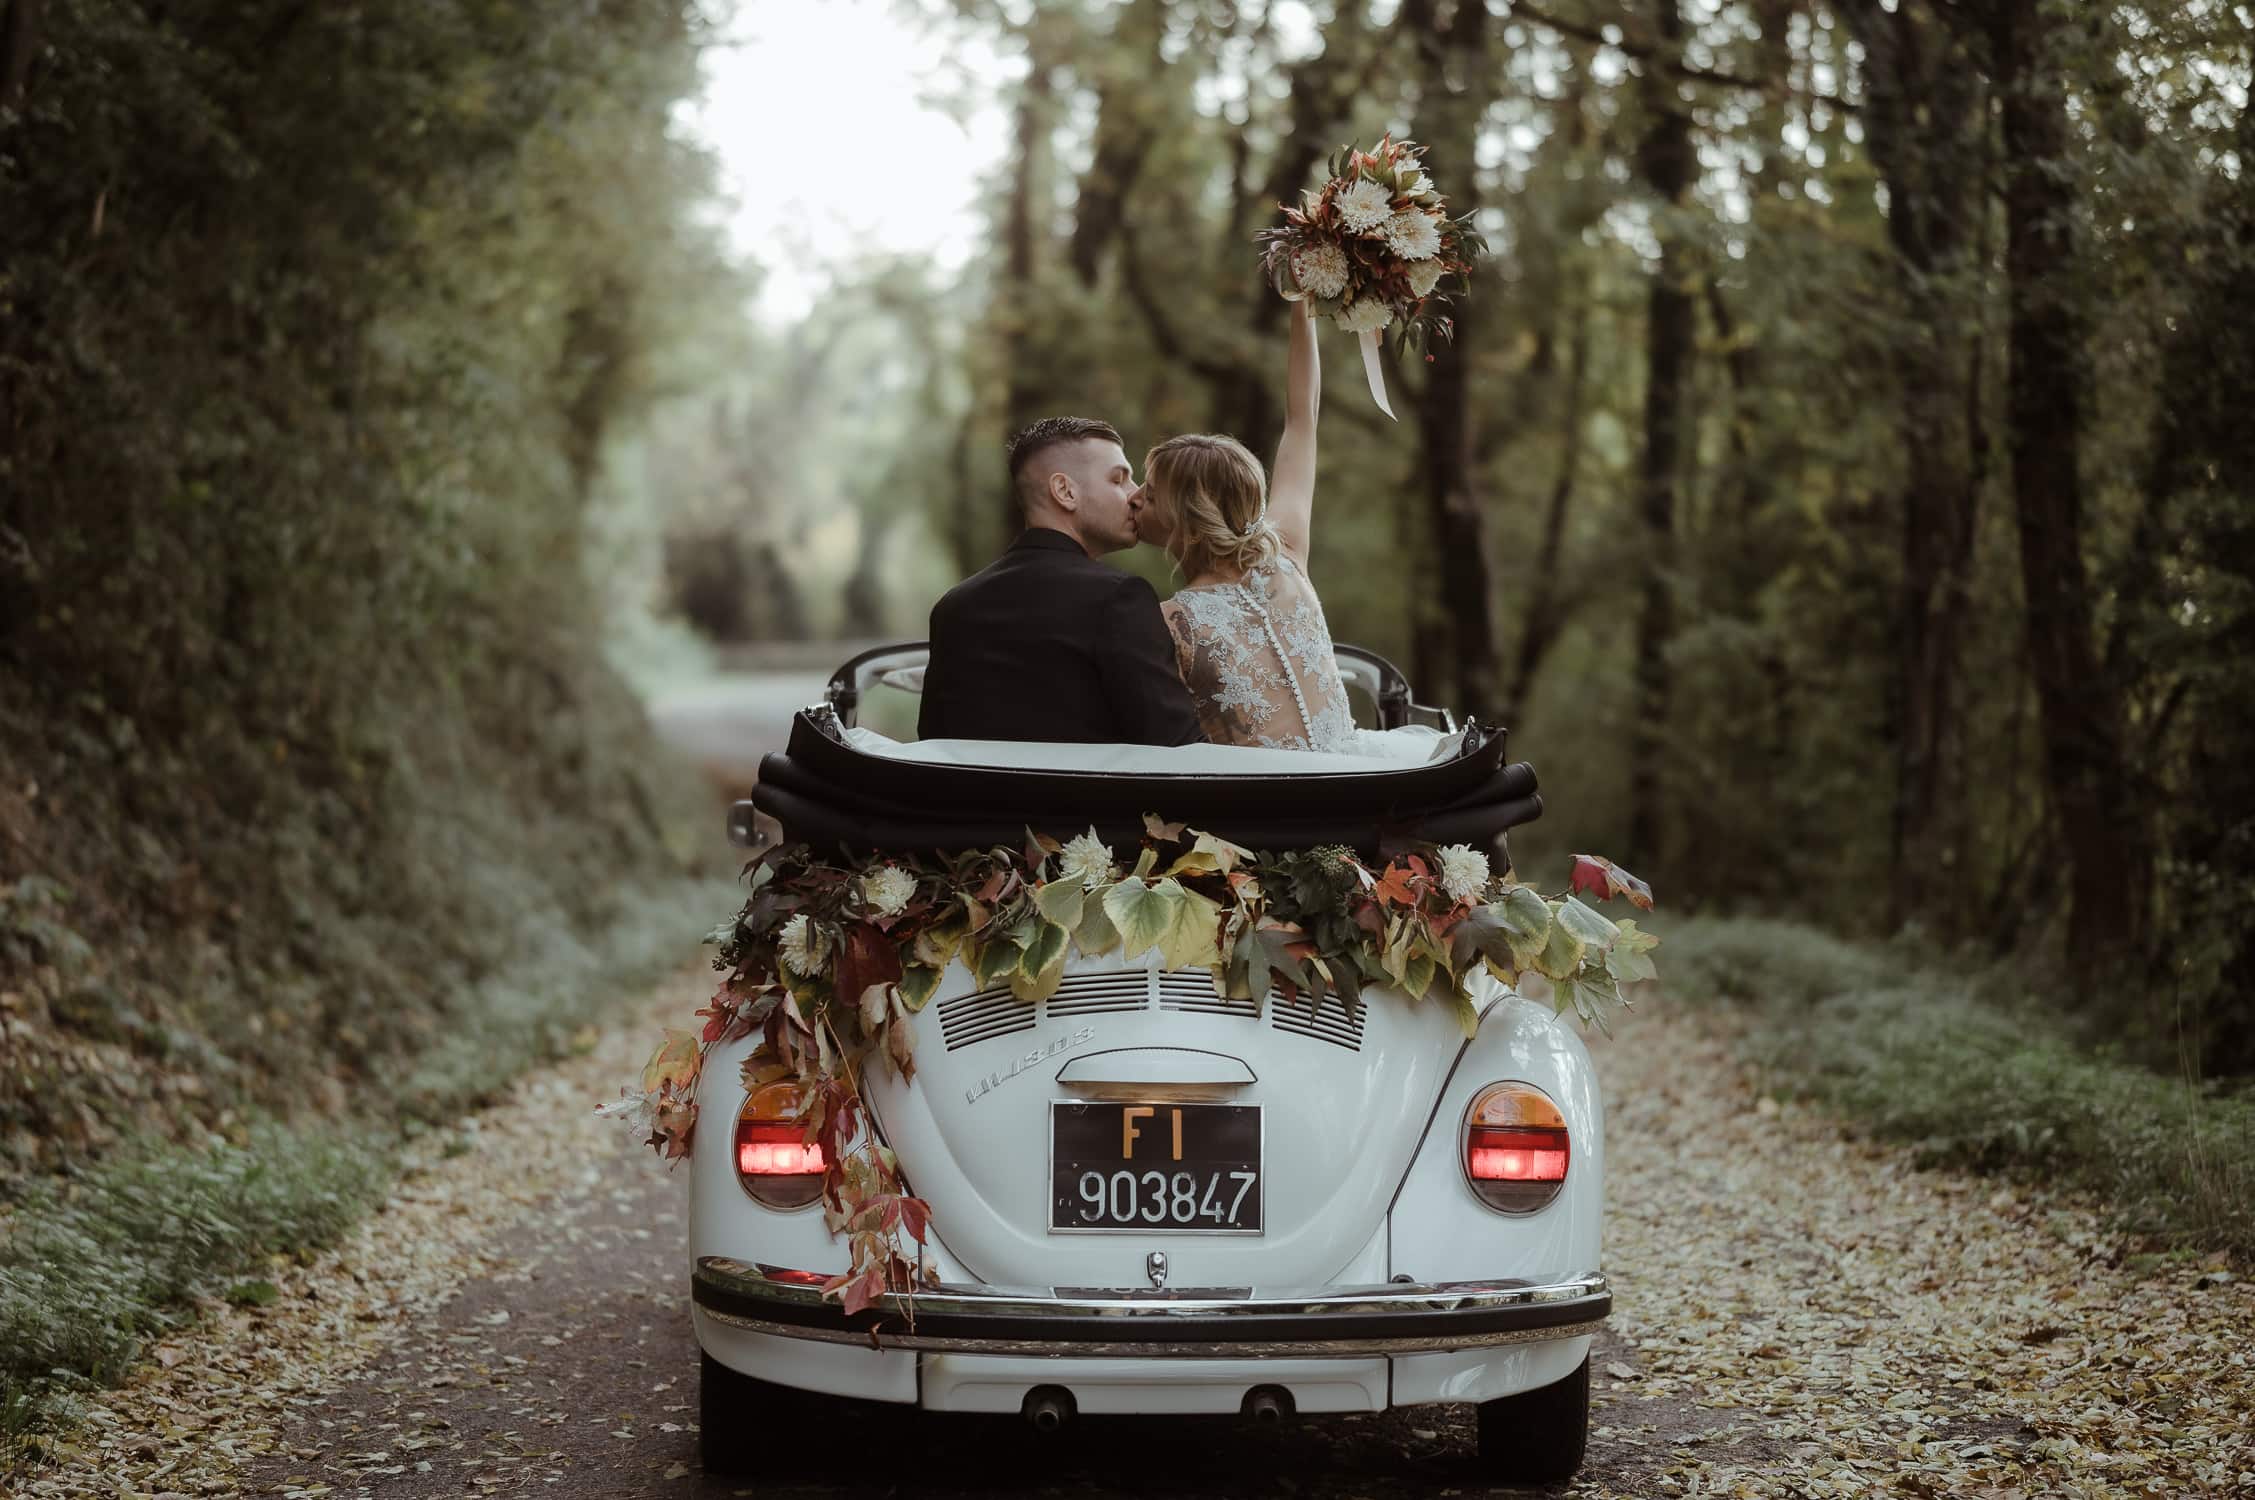 Bride and groom on a vintage VW white car with flowers while kissing in a forest in Italy | Elopement Definition